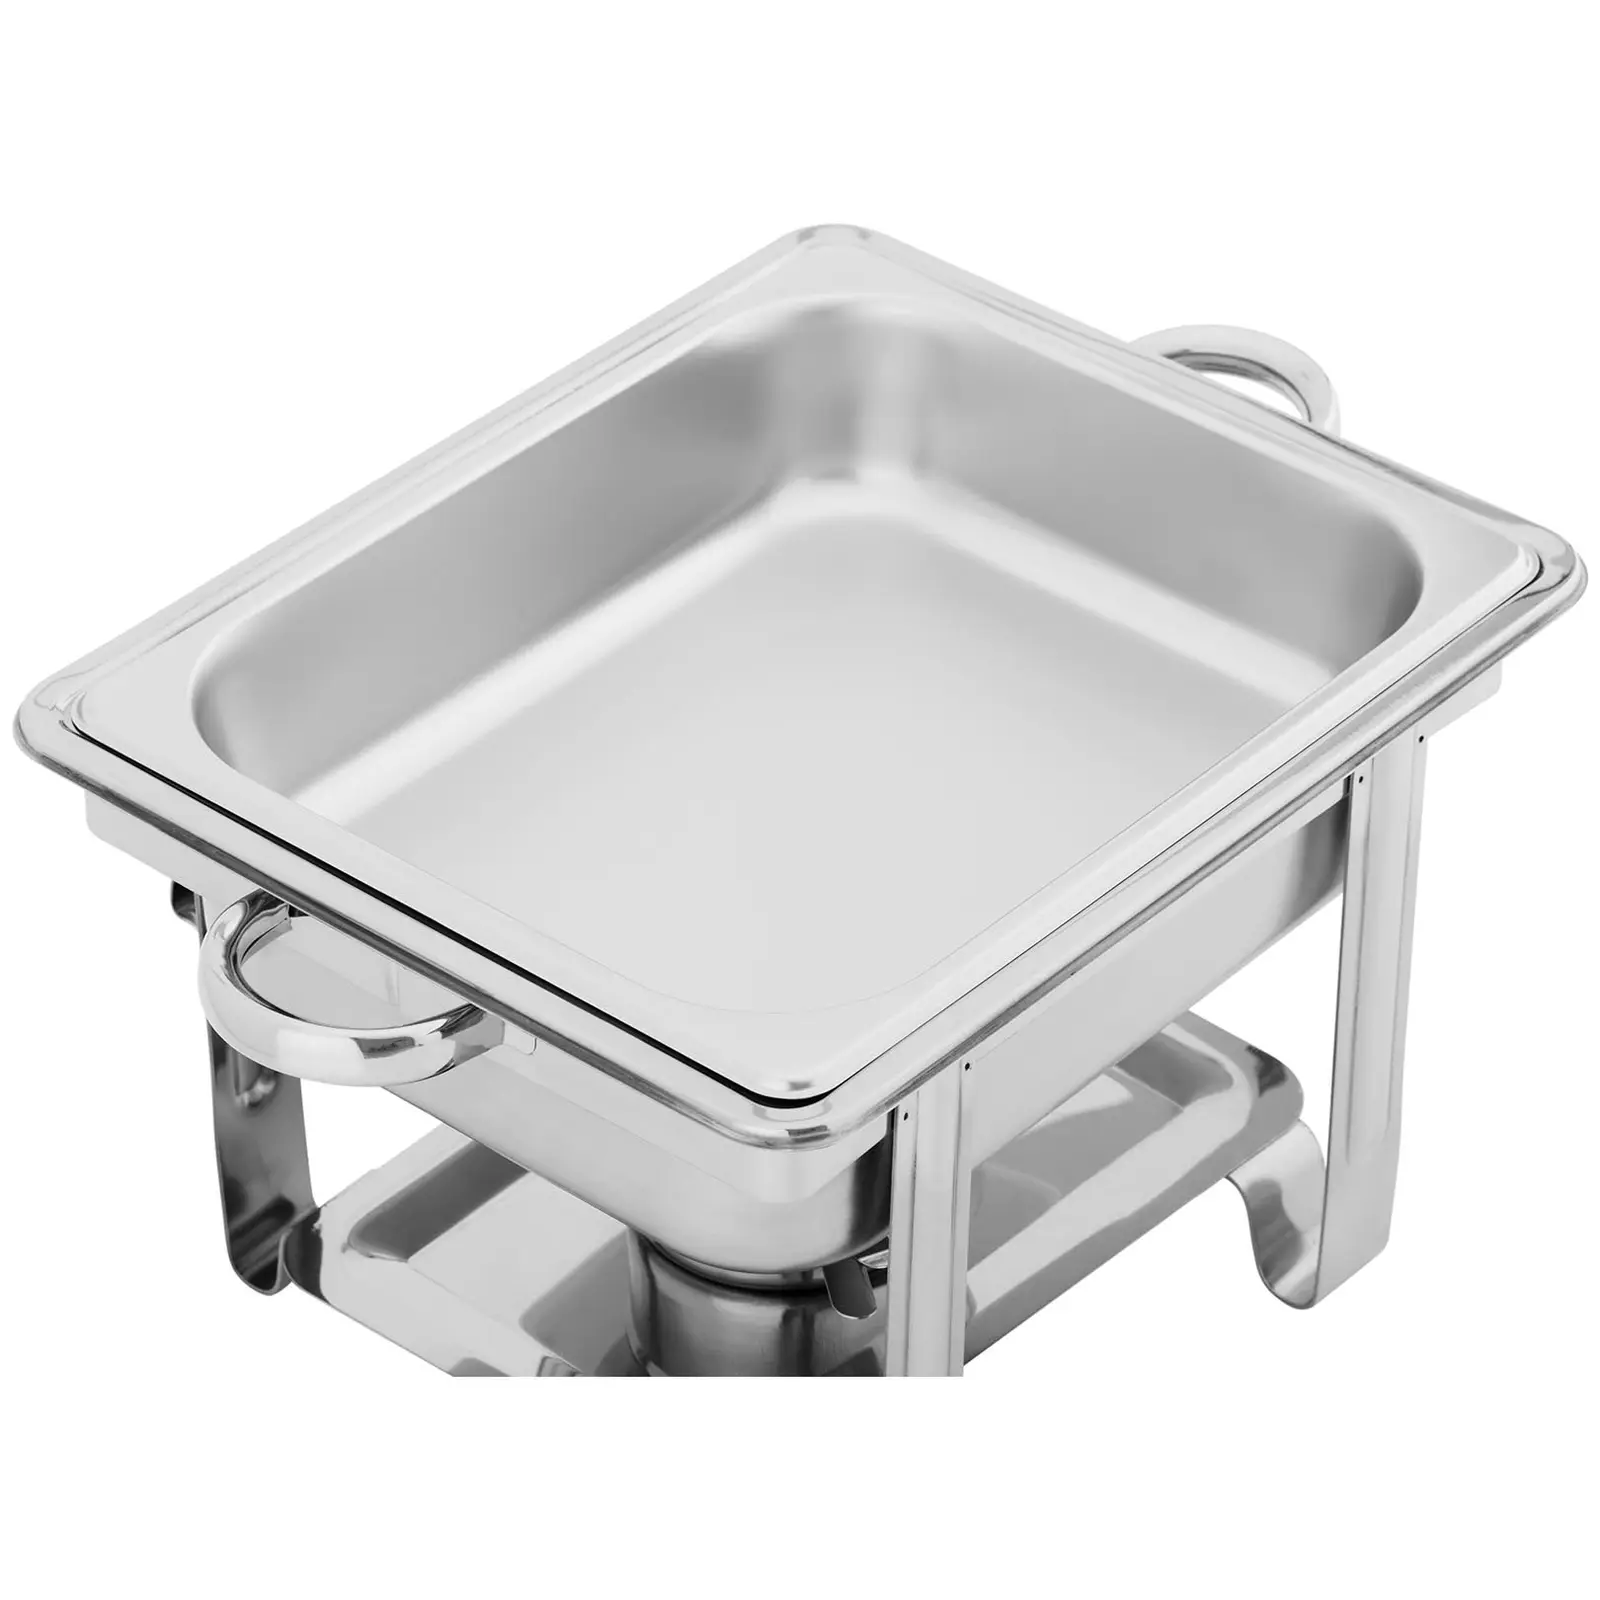 Chafing Dish - 4,5 L - con  contenedor GN 1/2 - Royal Catering